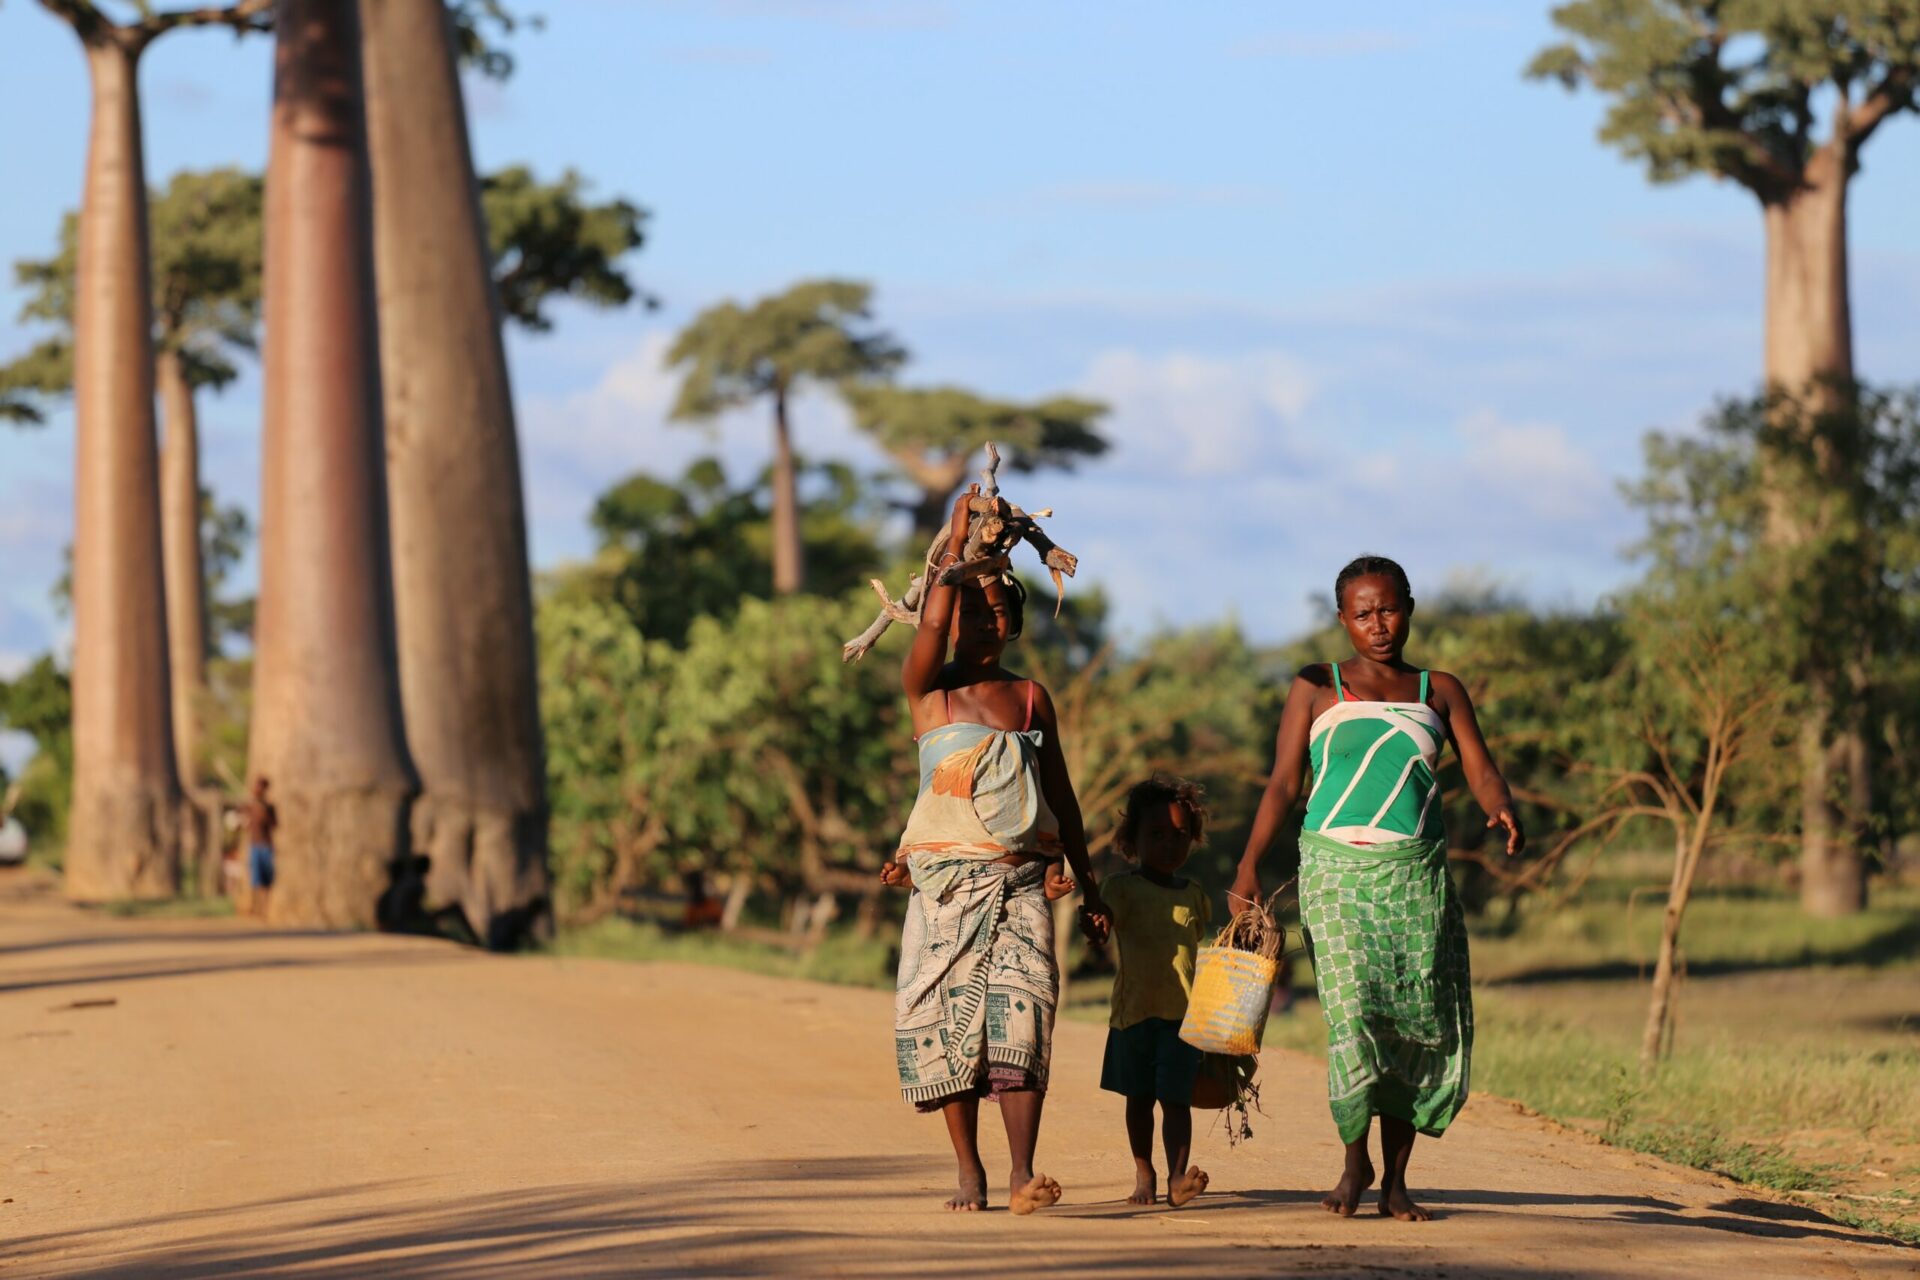 Madagascar, three local people walking on a dirt road with towering boabab trees seen on safari in Madagascar